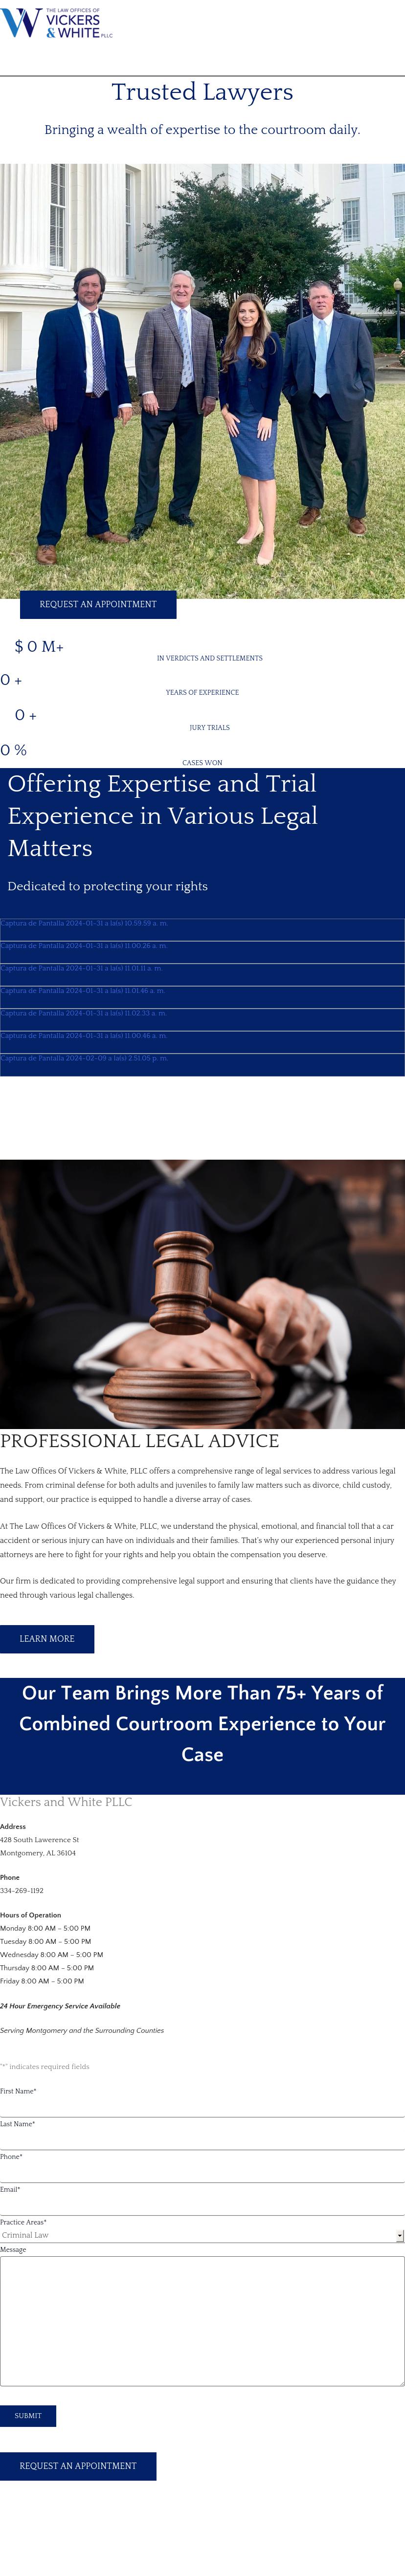 Law Offices of Vickers & White, PLLC - Montgomery AL Lawyers